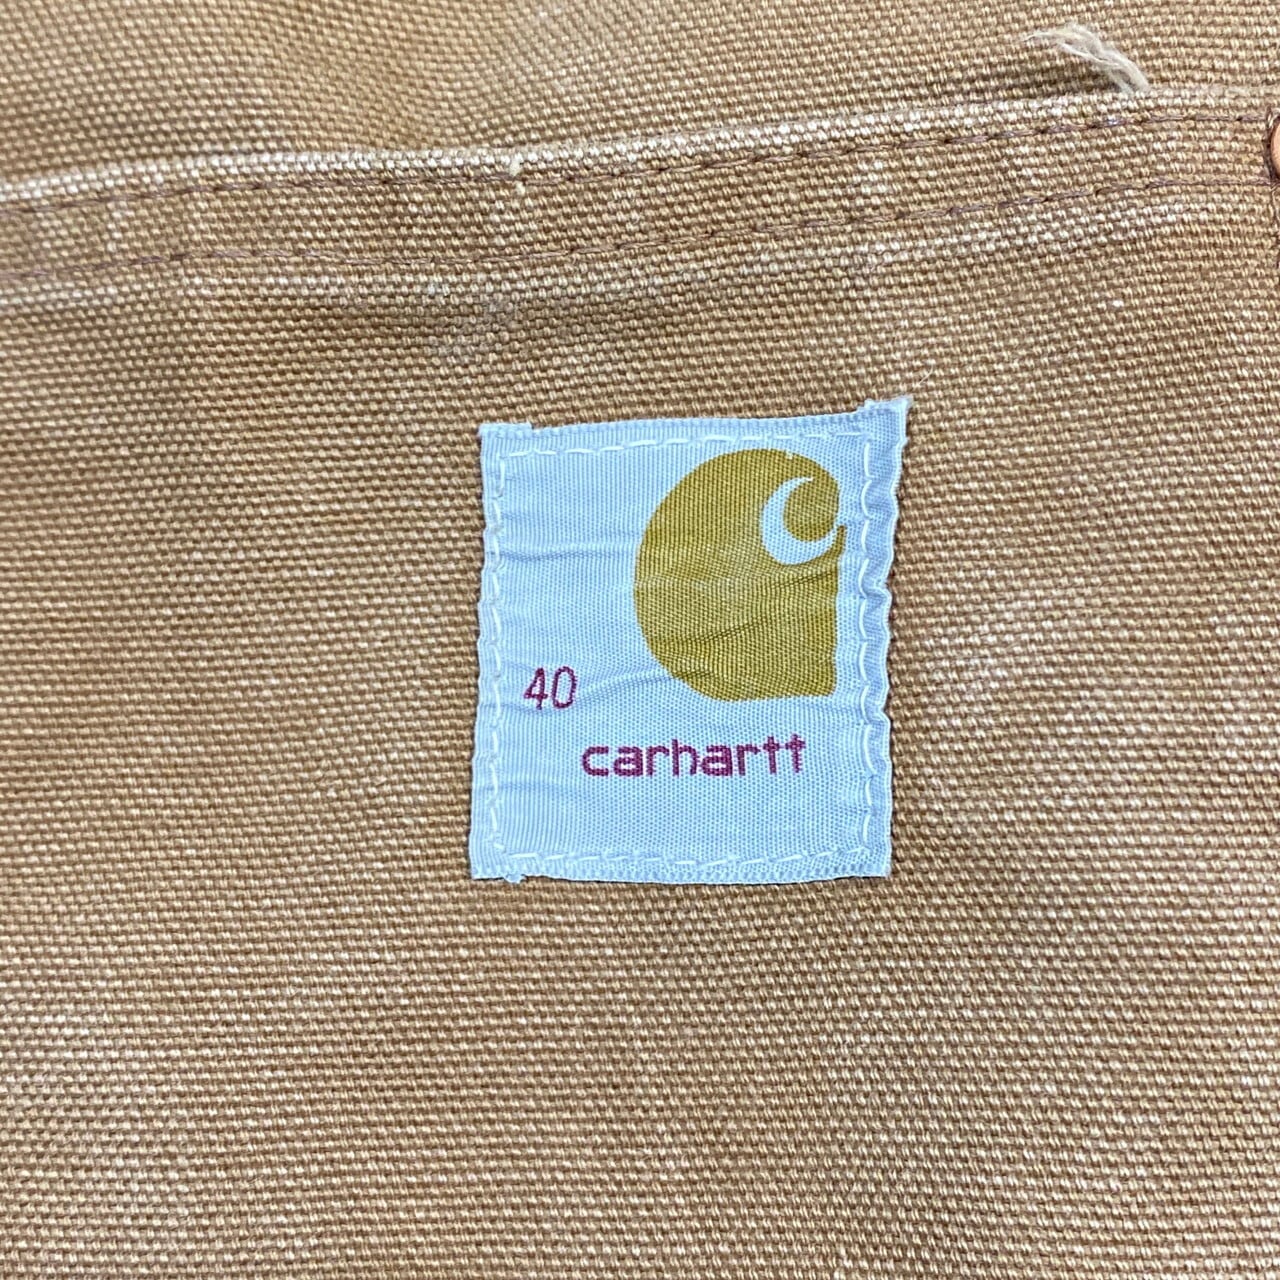 Carhartt WIP カーハート PULLOVER 新品タグ付き　40%of